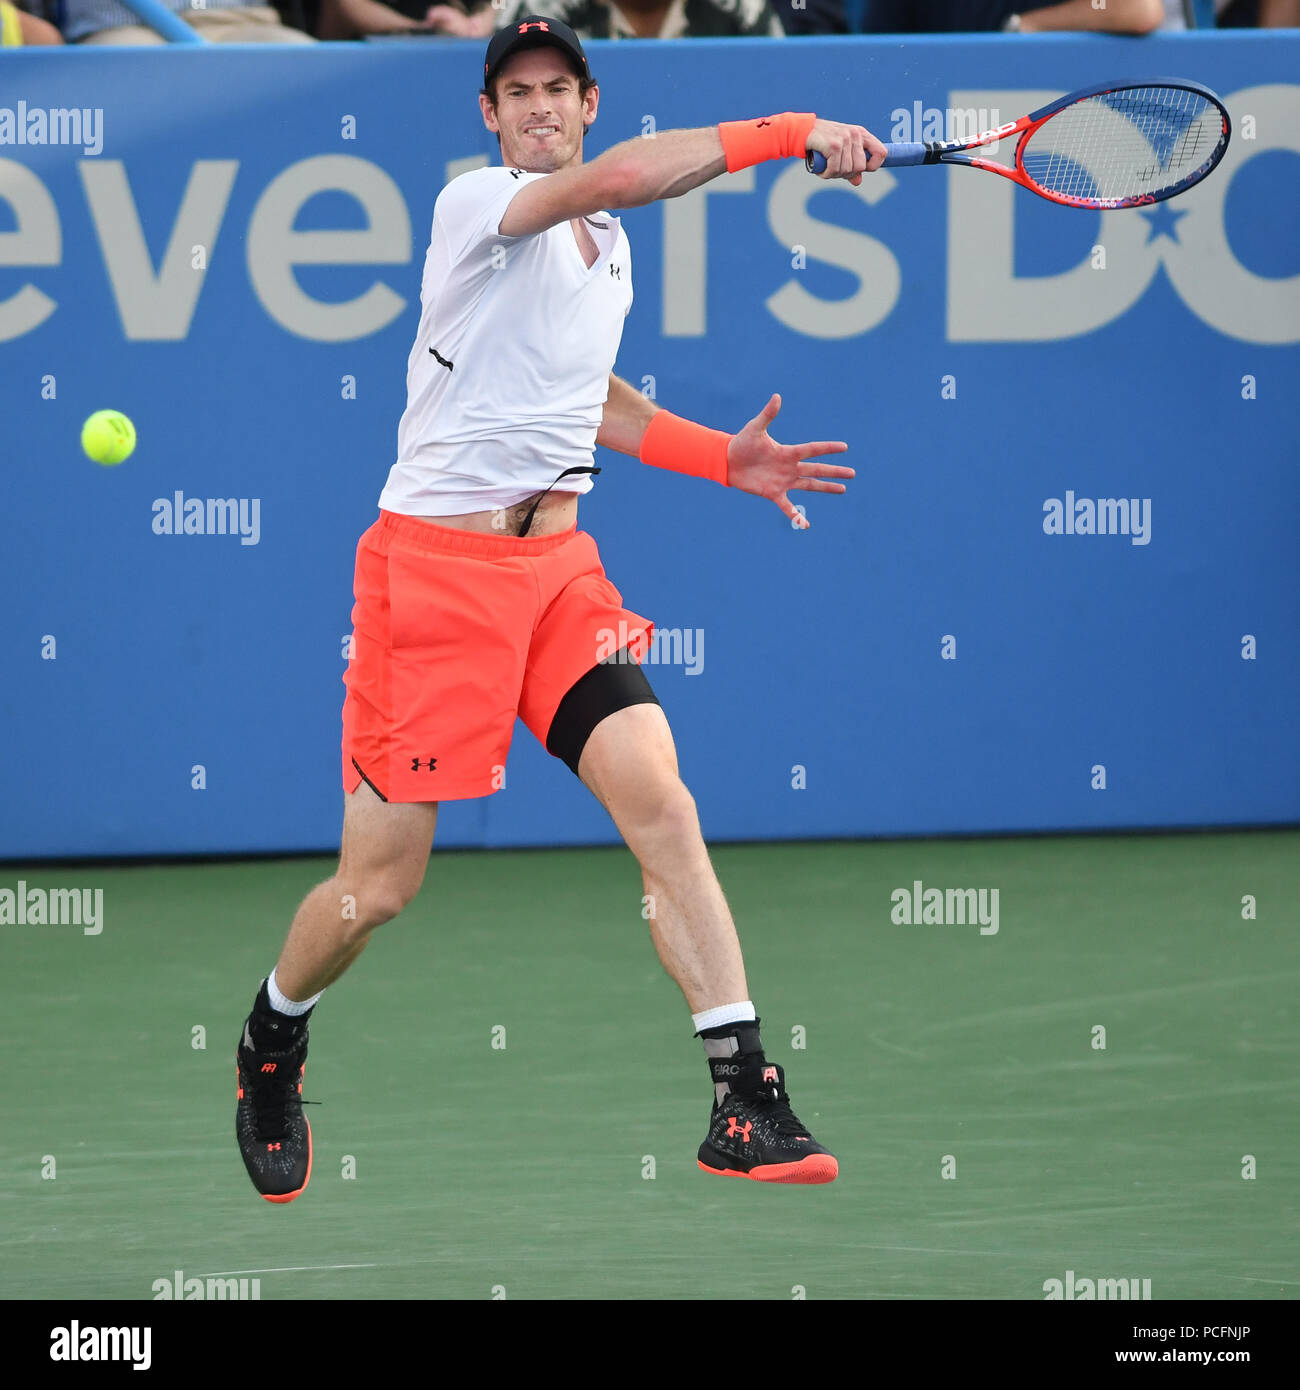 Washington, D.C, USA. 1st Aug, 2018. ANDY MURRAY hits a forehand during his 2nd round match at the Citi Open at the Rock Creek Park Tennis Center in Washington, DC Credit: Kyle Gustafson/ZUMA Wire/Alamy Live News Stock Photo